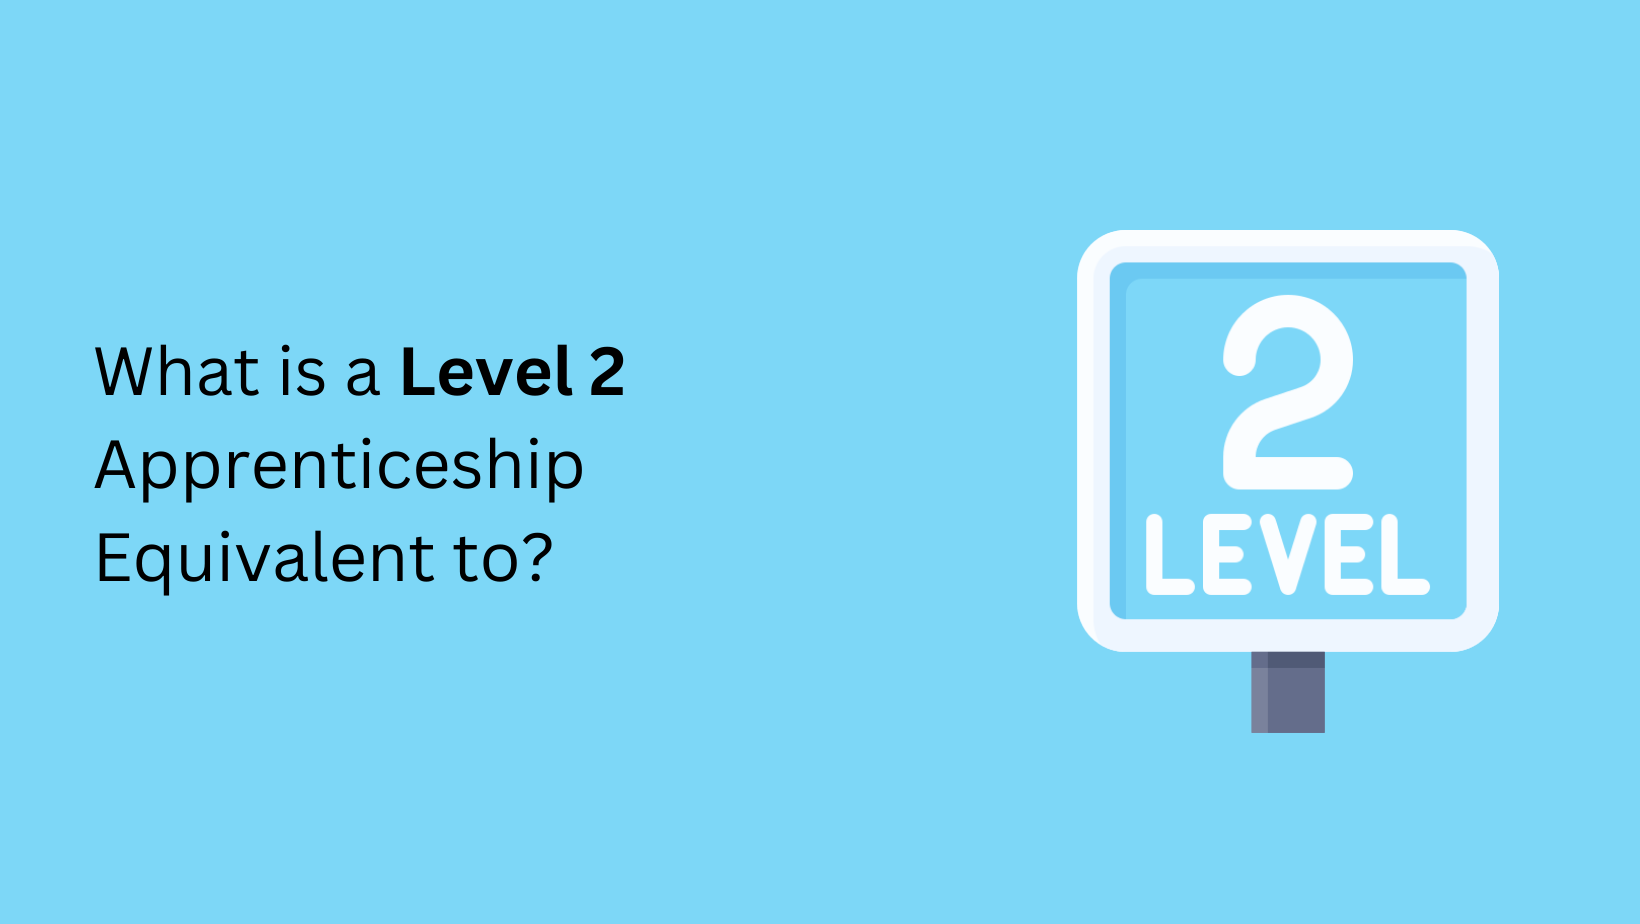 What is a Level 2 Apprenticeship Equivalent to